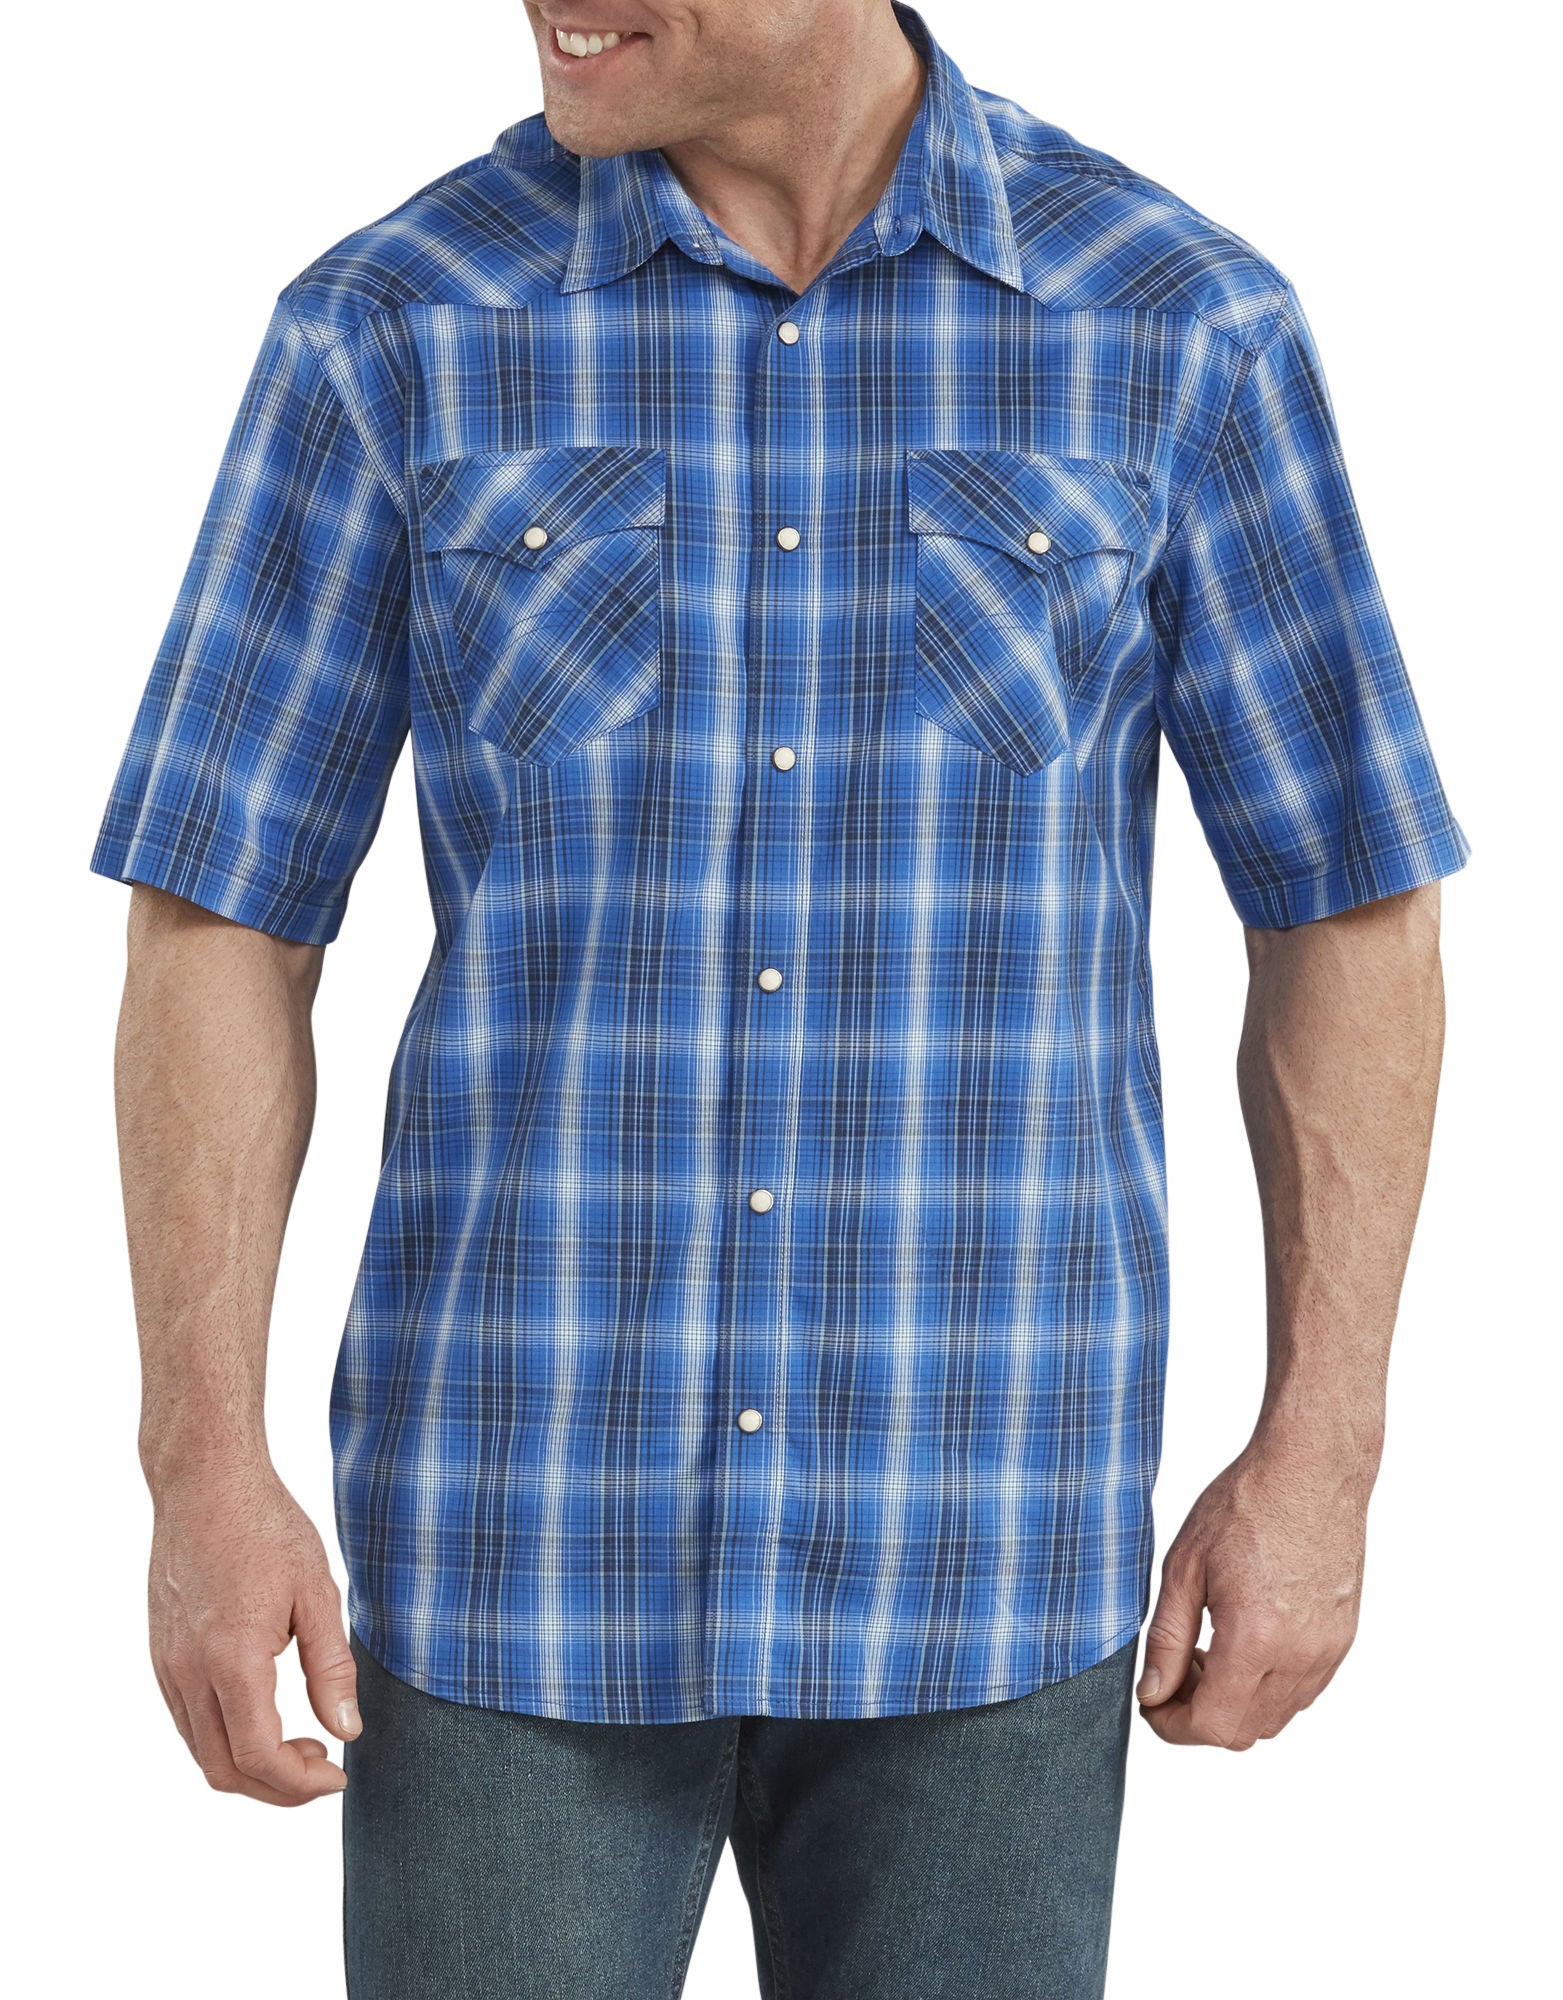 DIC-WS563 - Dickies Mens Icon Relaxed Fit Western Short Sleeve Shirt